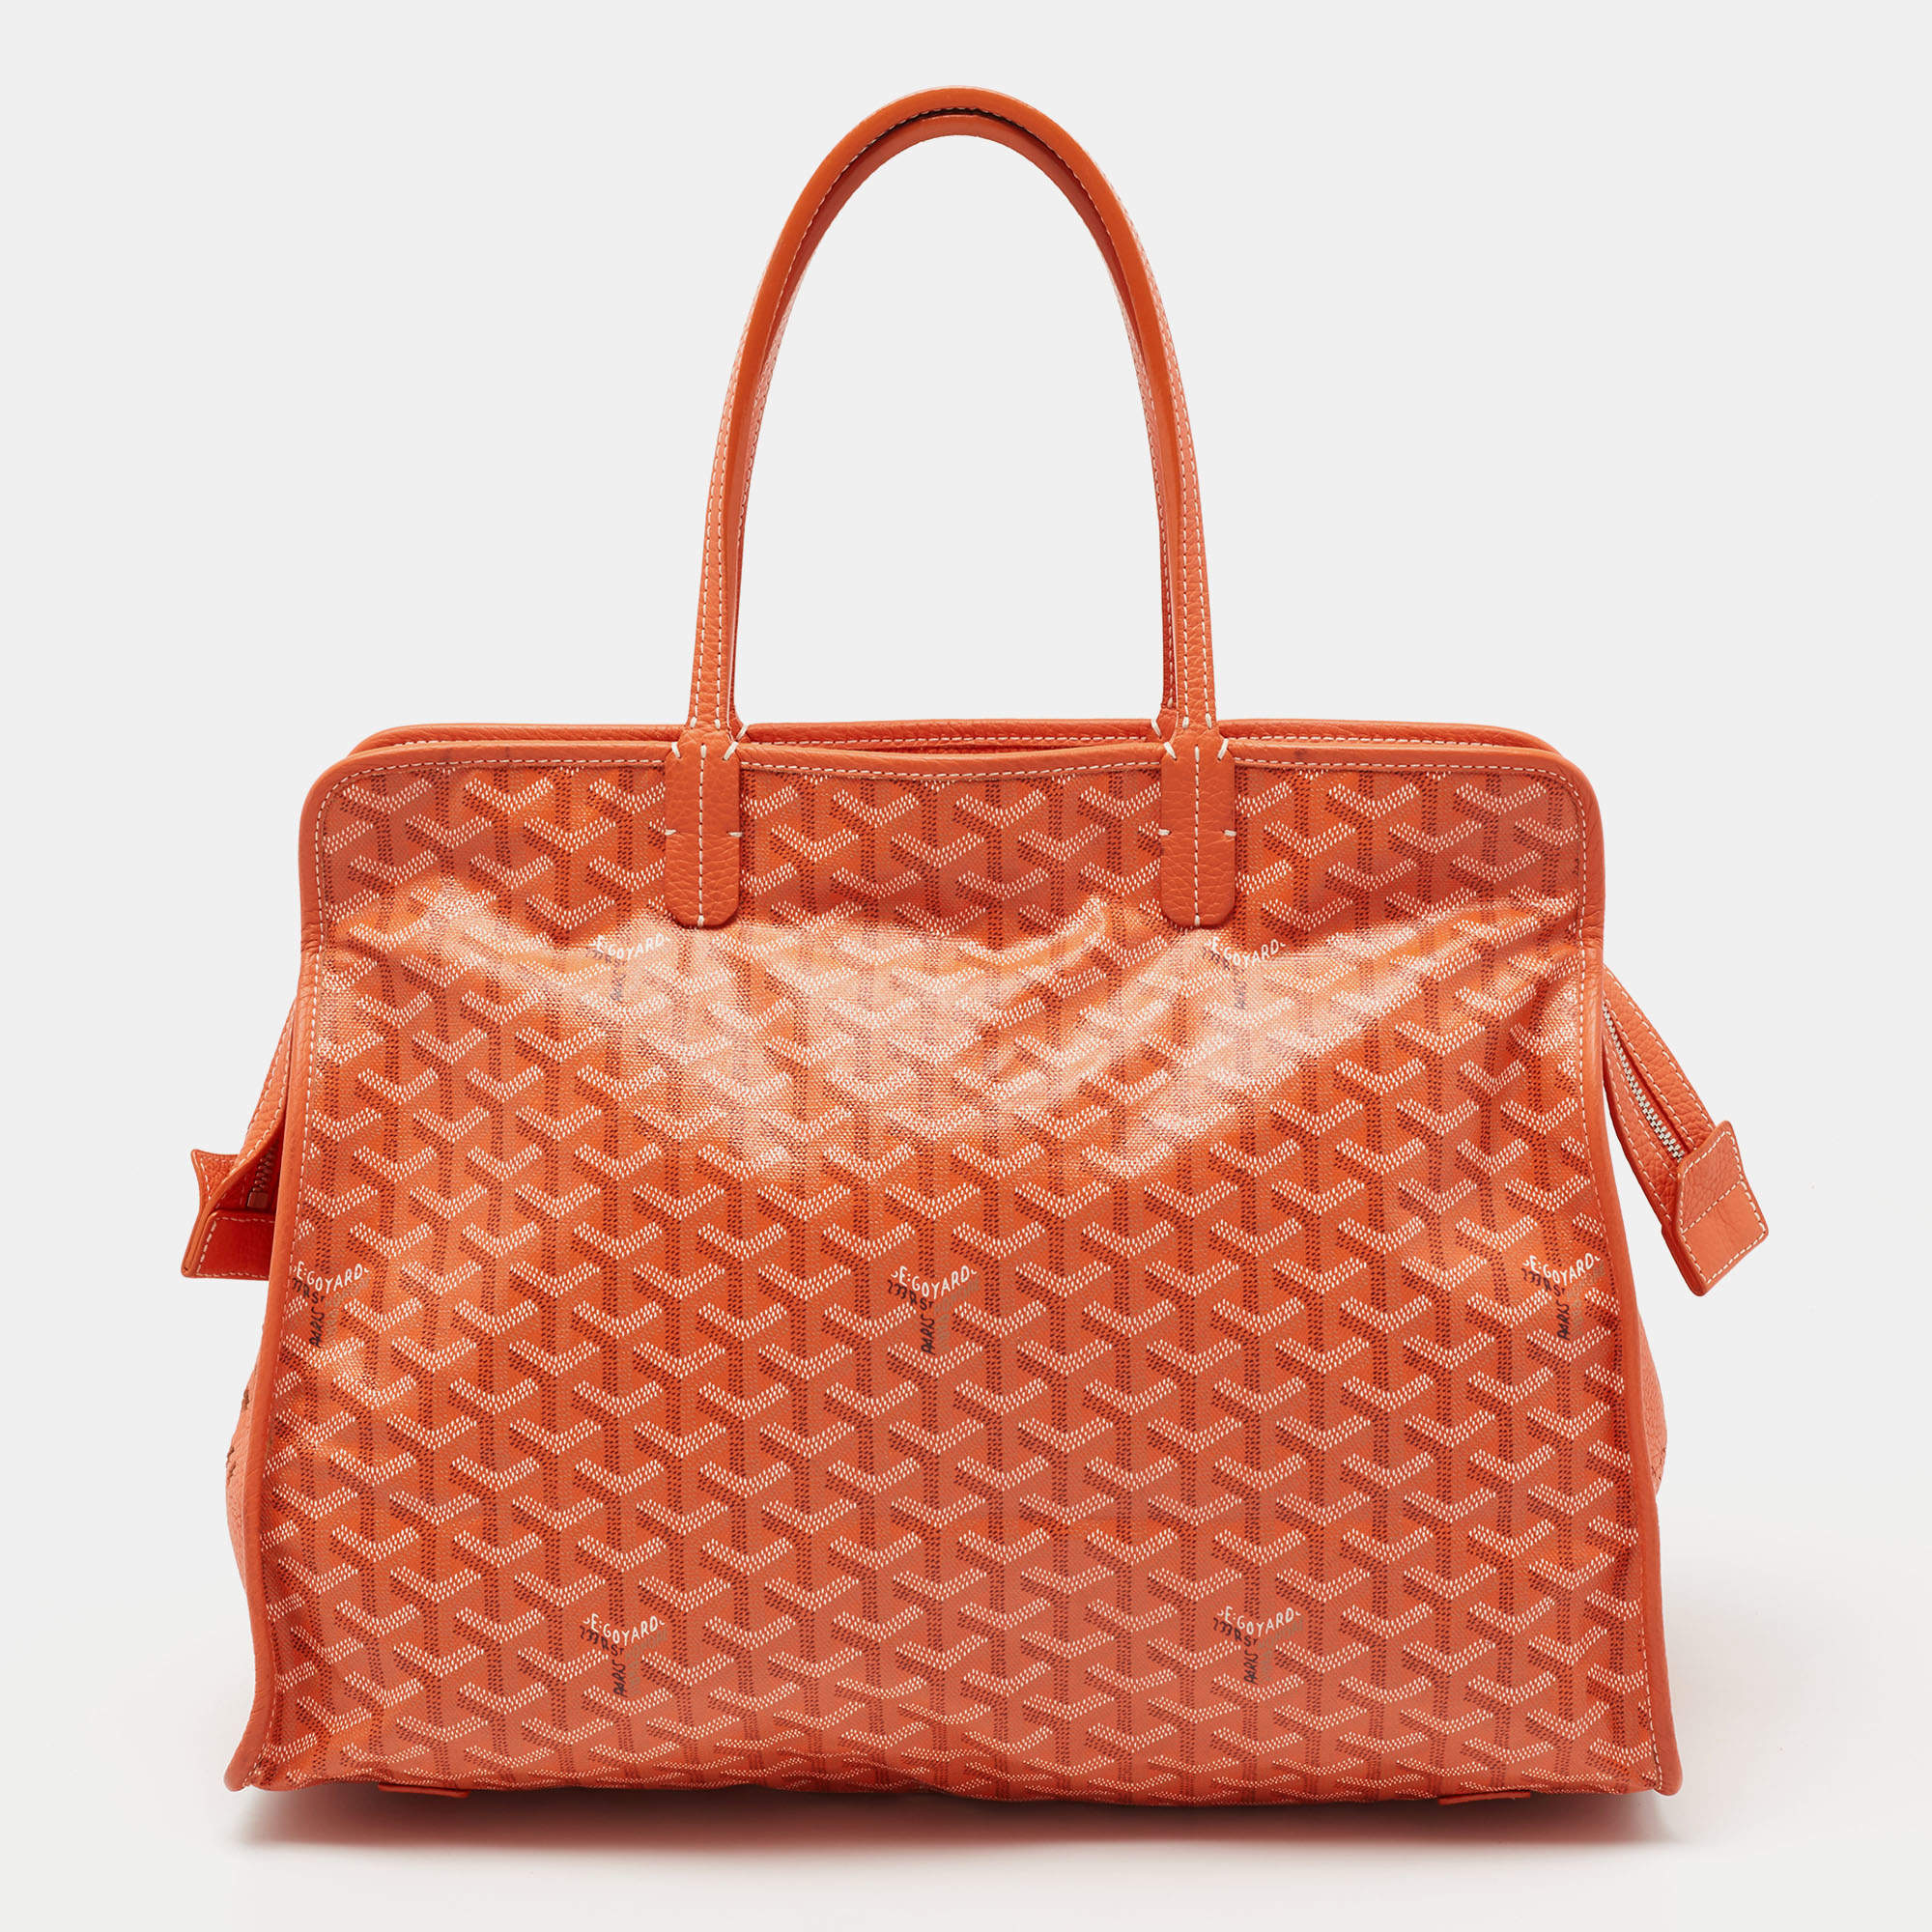 Hardy leather tote Goyard Brown in Leather - 33352624